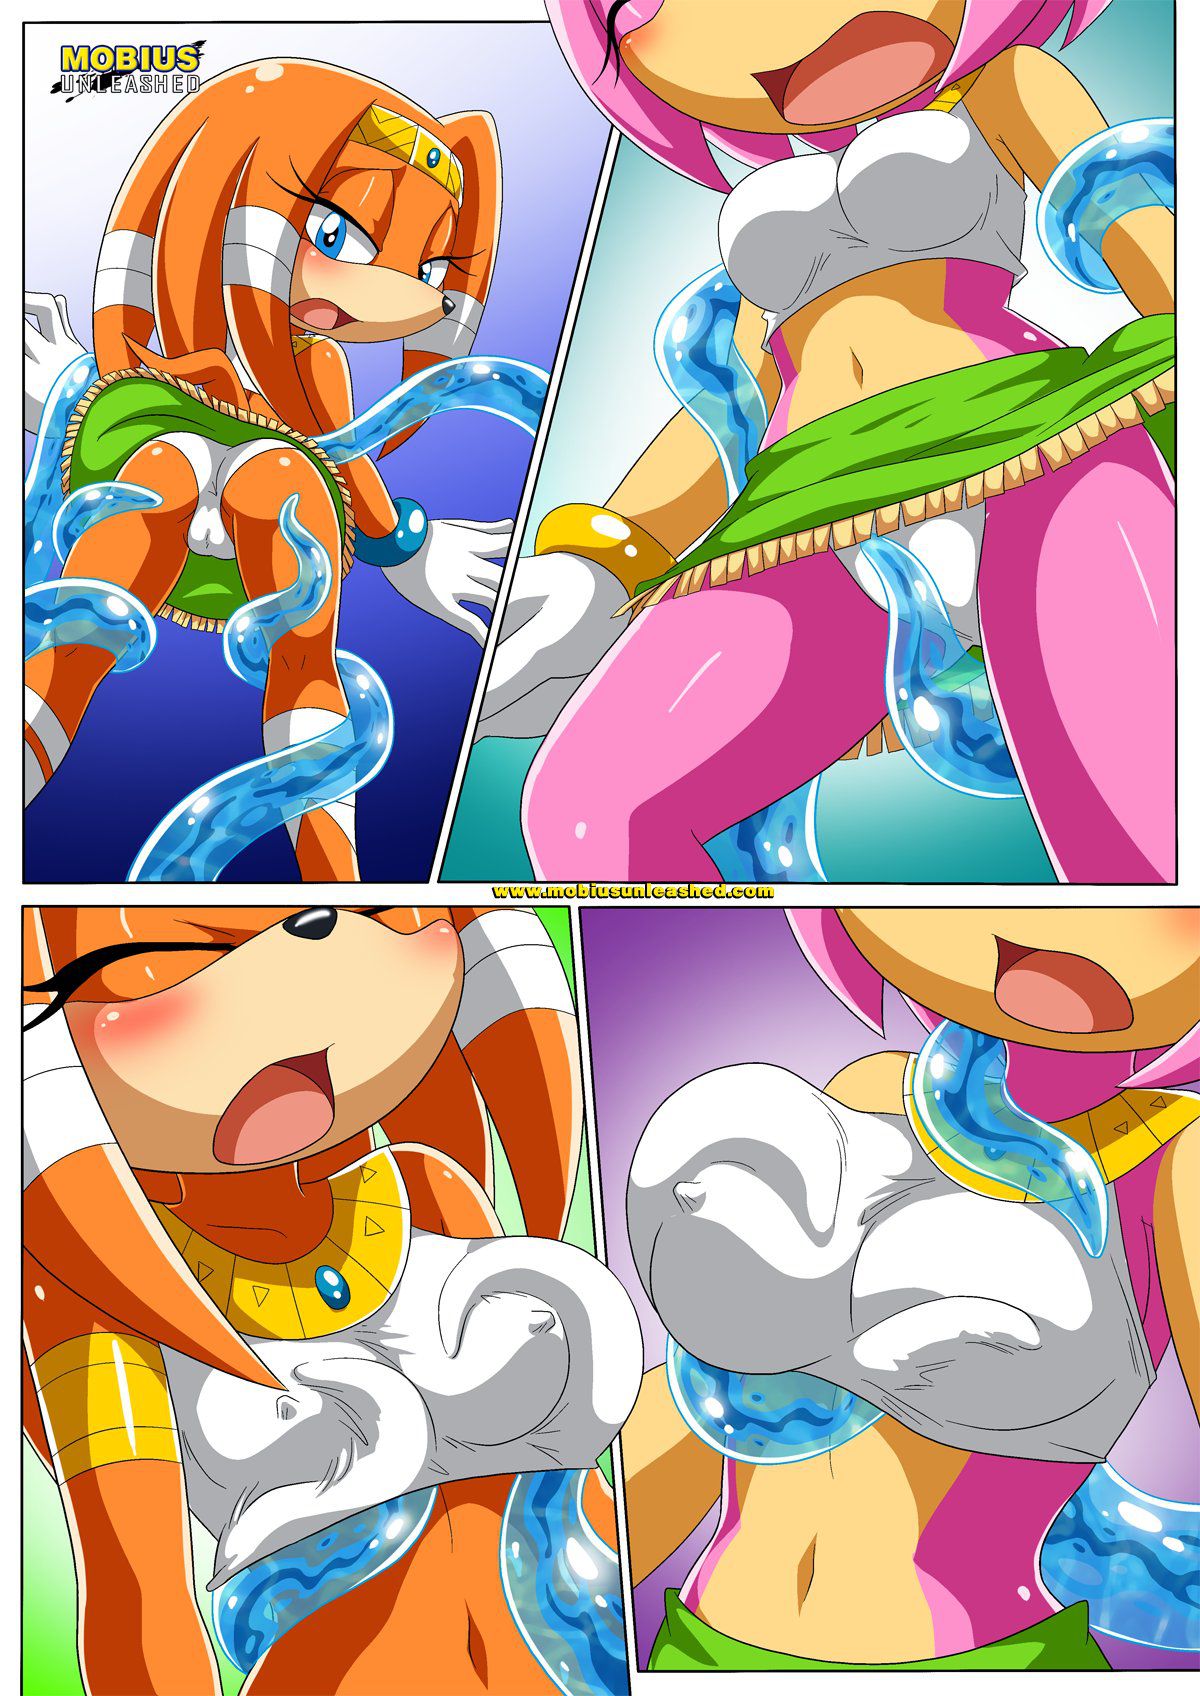 [Palcomix] Tentacled Girls 2 (Sonic The Hedgehog) [Ongoing] 11